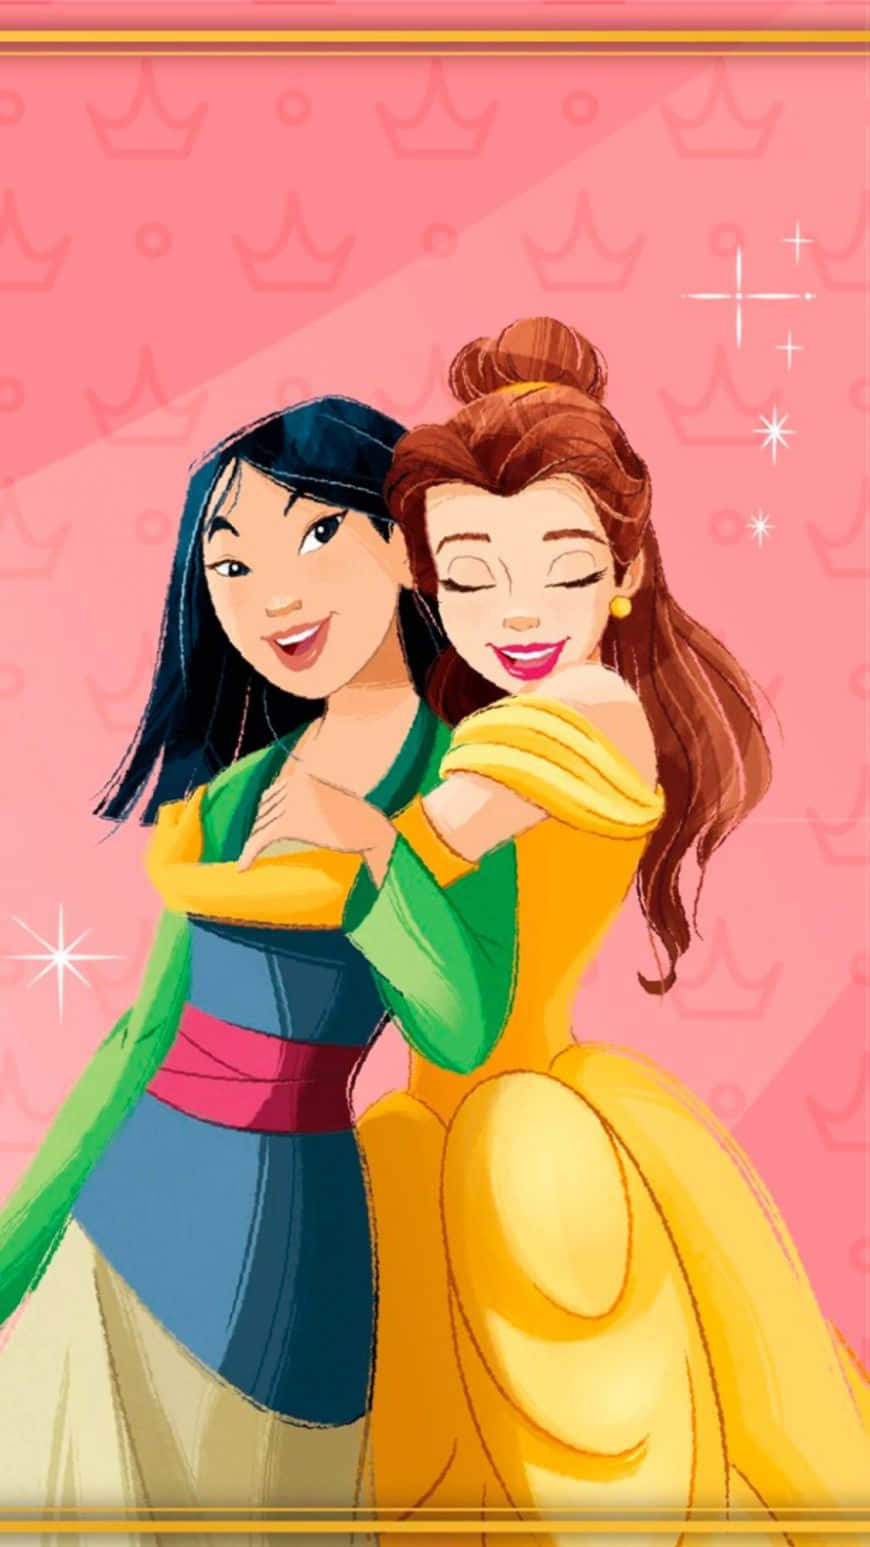 The magical Disney Princesses gather together in friendship and love.